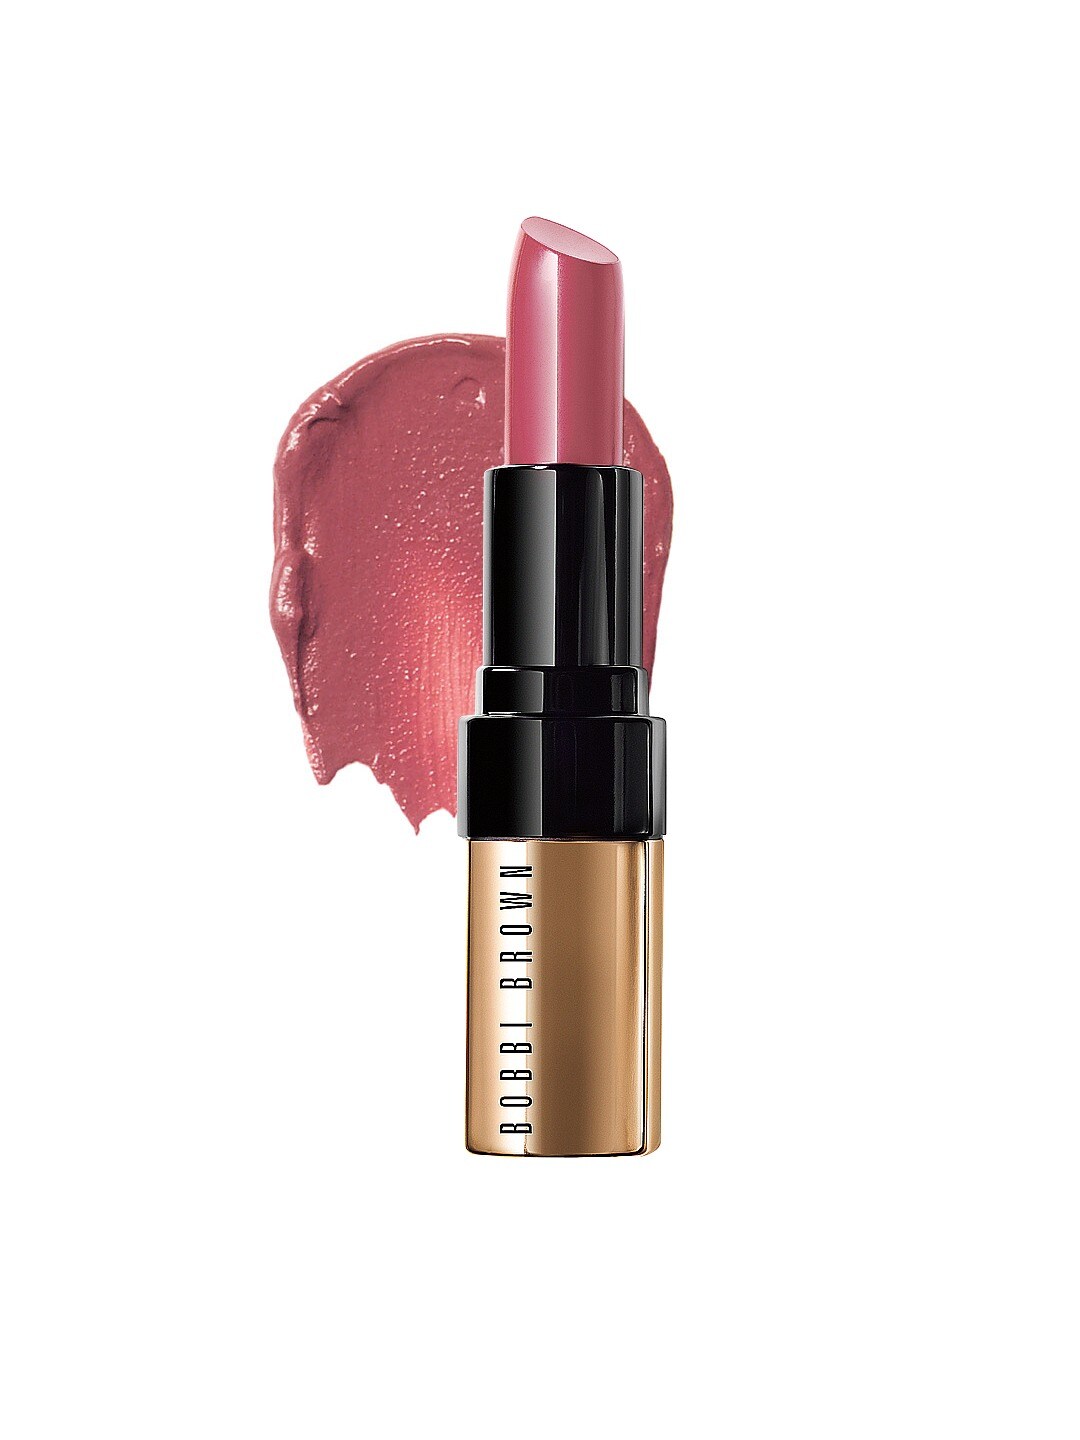 Bobbi Brown Luxe Lip Color - Soft Berry 3.8 g Price in India